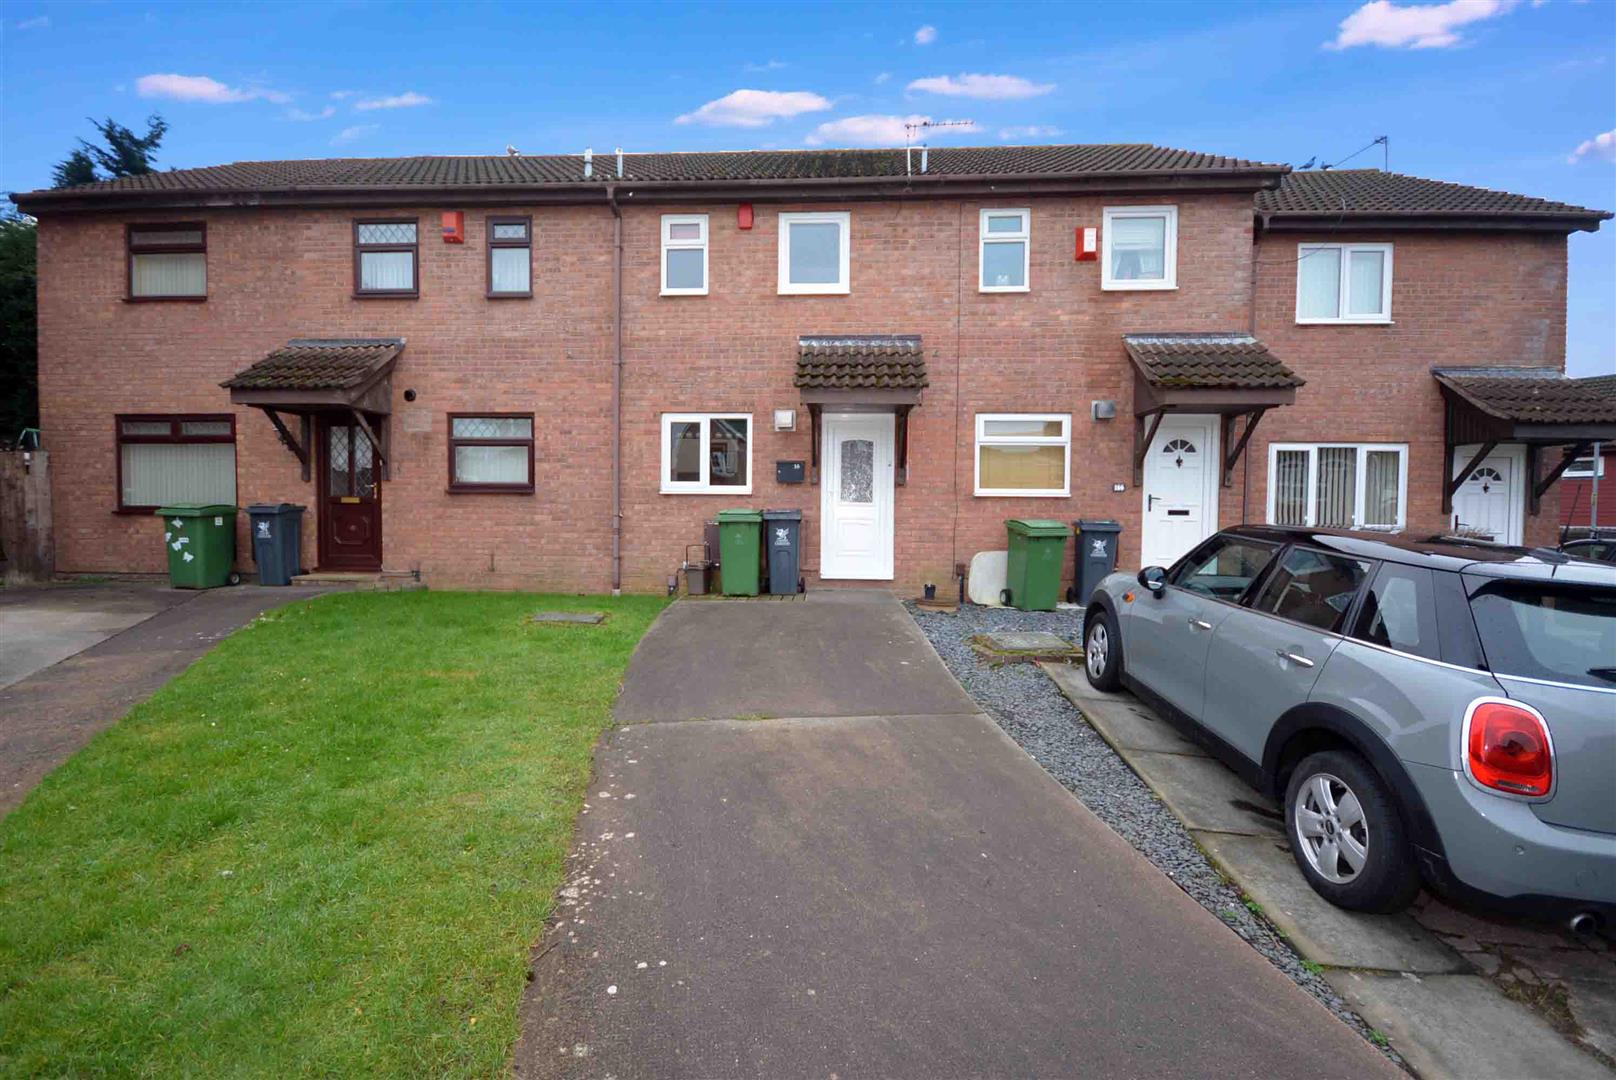 2 bed  for sale in Bryn Heulog, Cardiff, CF23